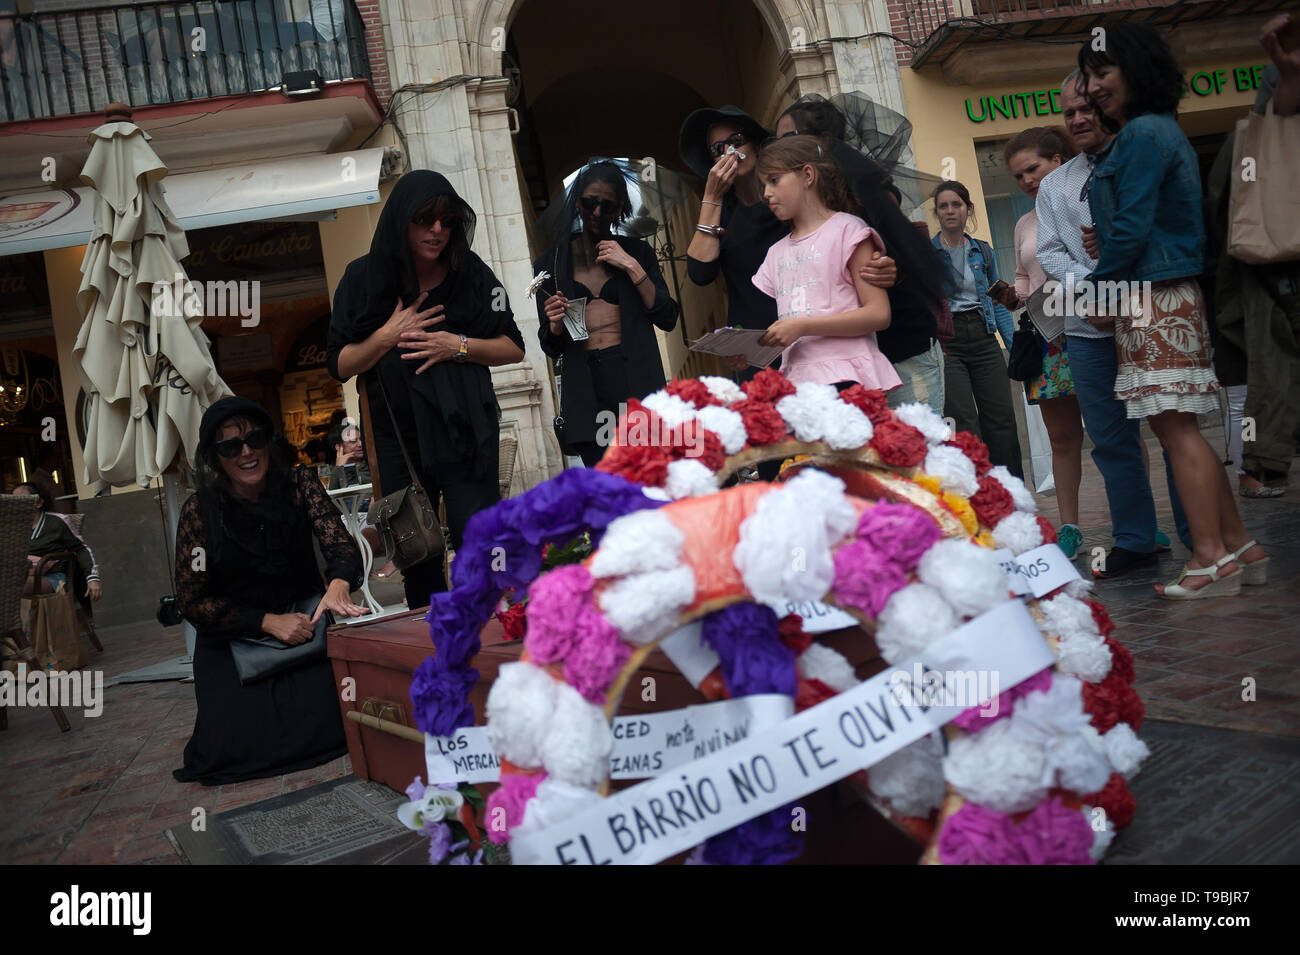 Flowers seen next to a coffin during the protest. The association of down town neighbours from Malaga have organized a symbolic funeral of a neighbour as part of a performance against the high cost of housing and rent because of property speculation in Malaga centre. Stock Photo